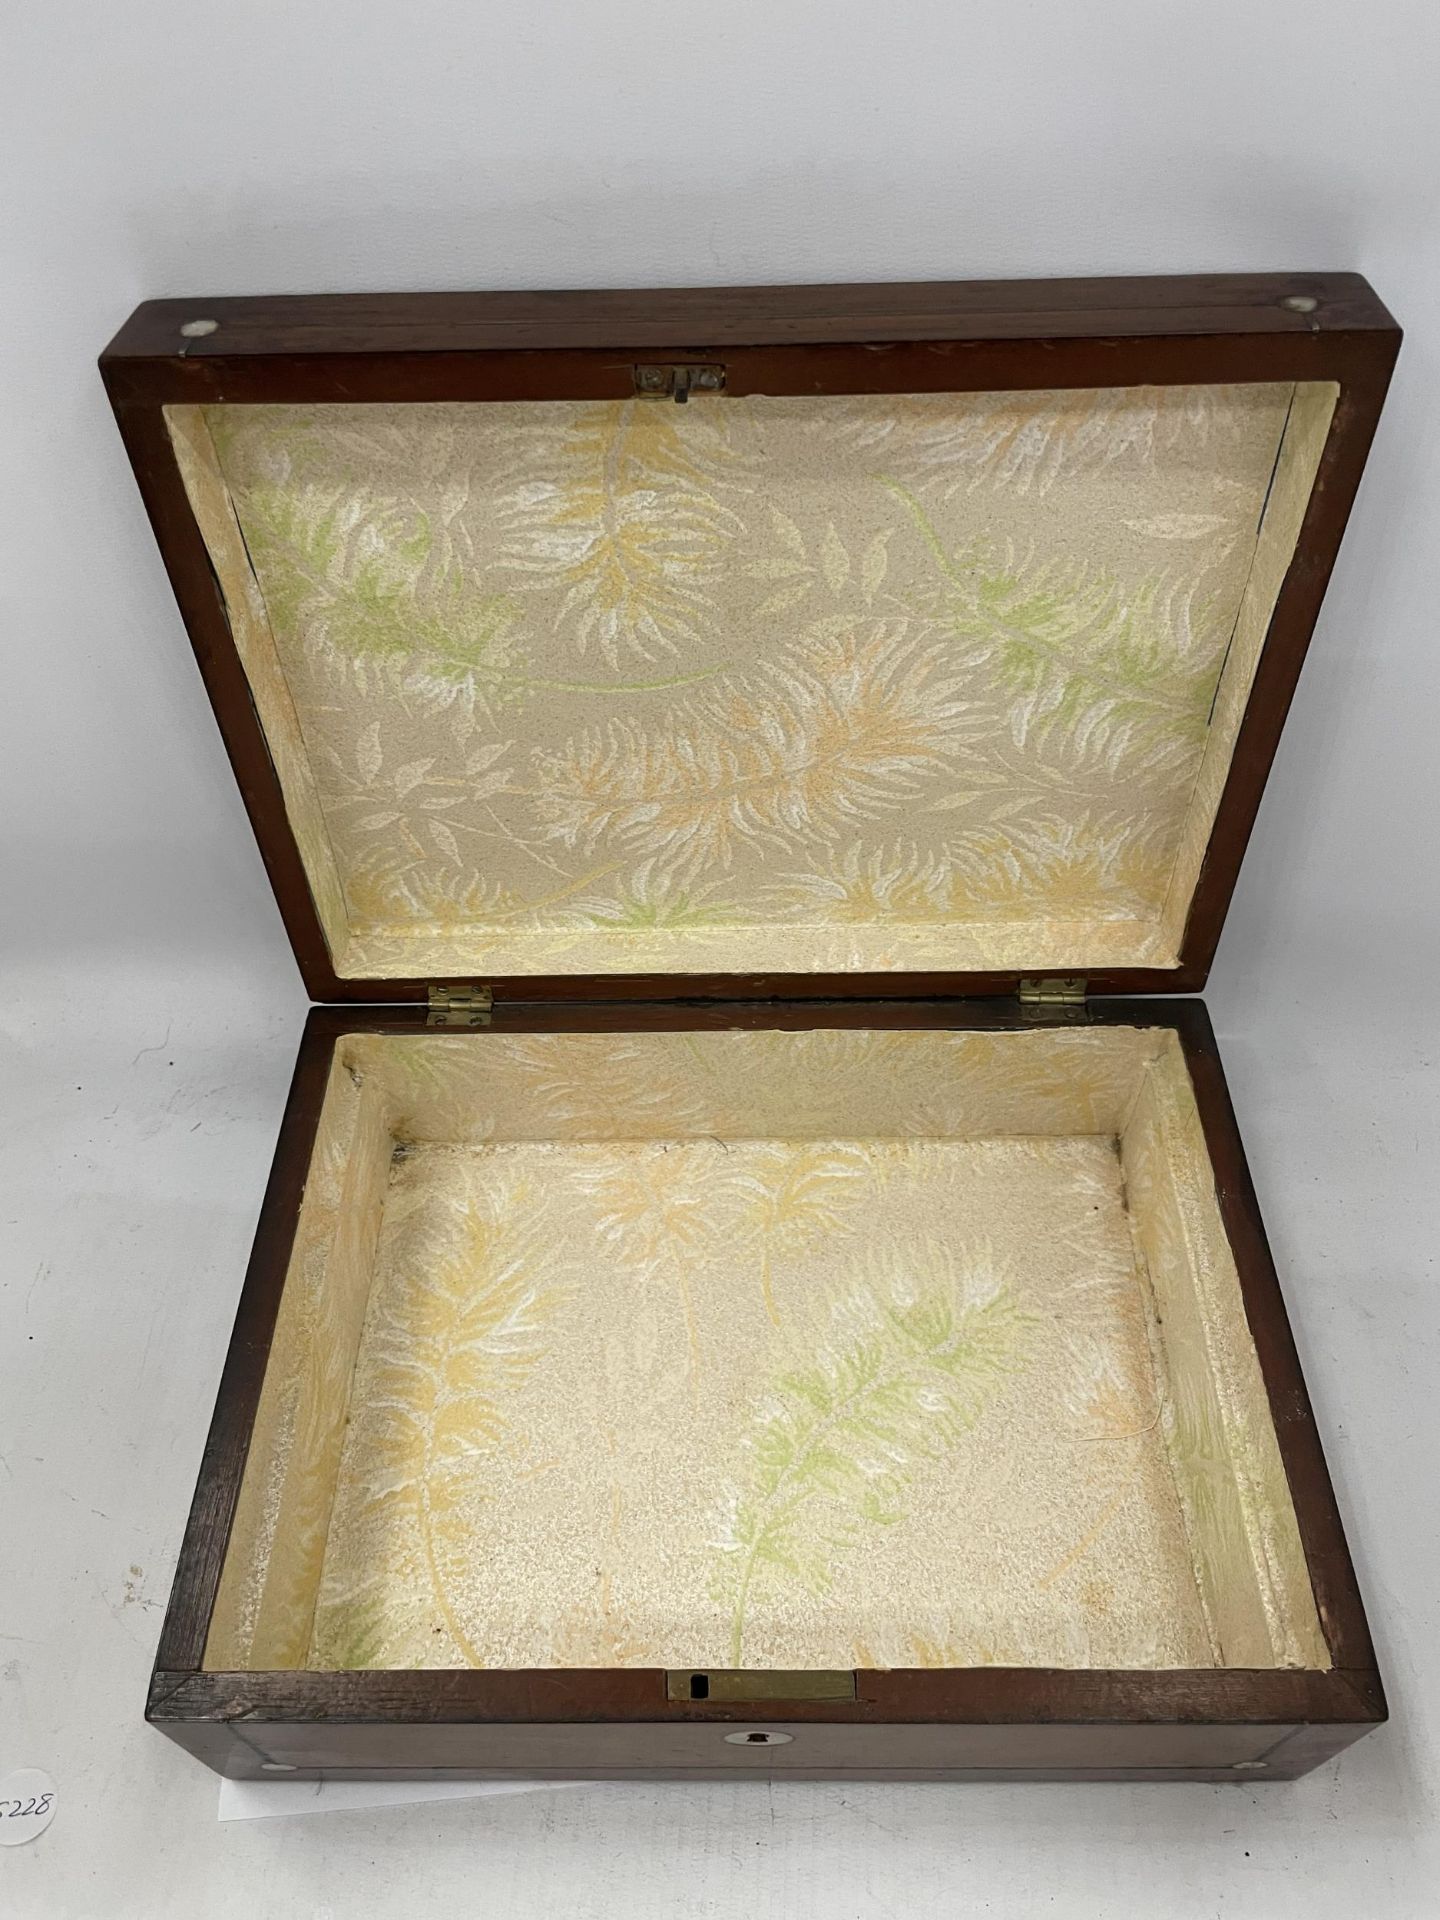 AN ANTIQUE ROSEWOOD JEWELLERY BOX WITH MOTHER OF PEARL INLAY - Image 3 of 3